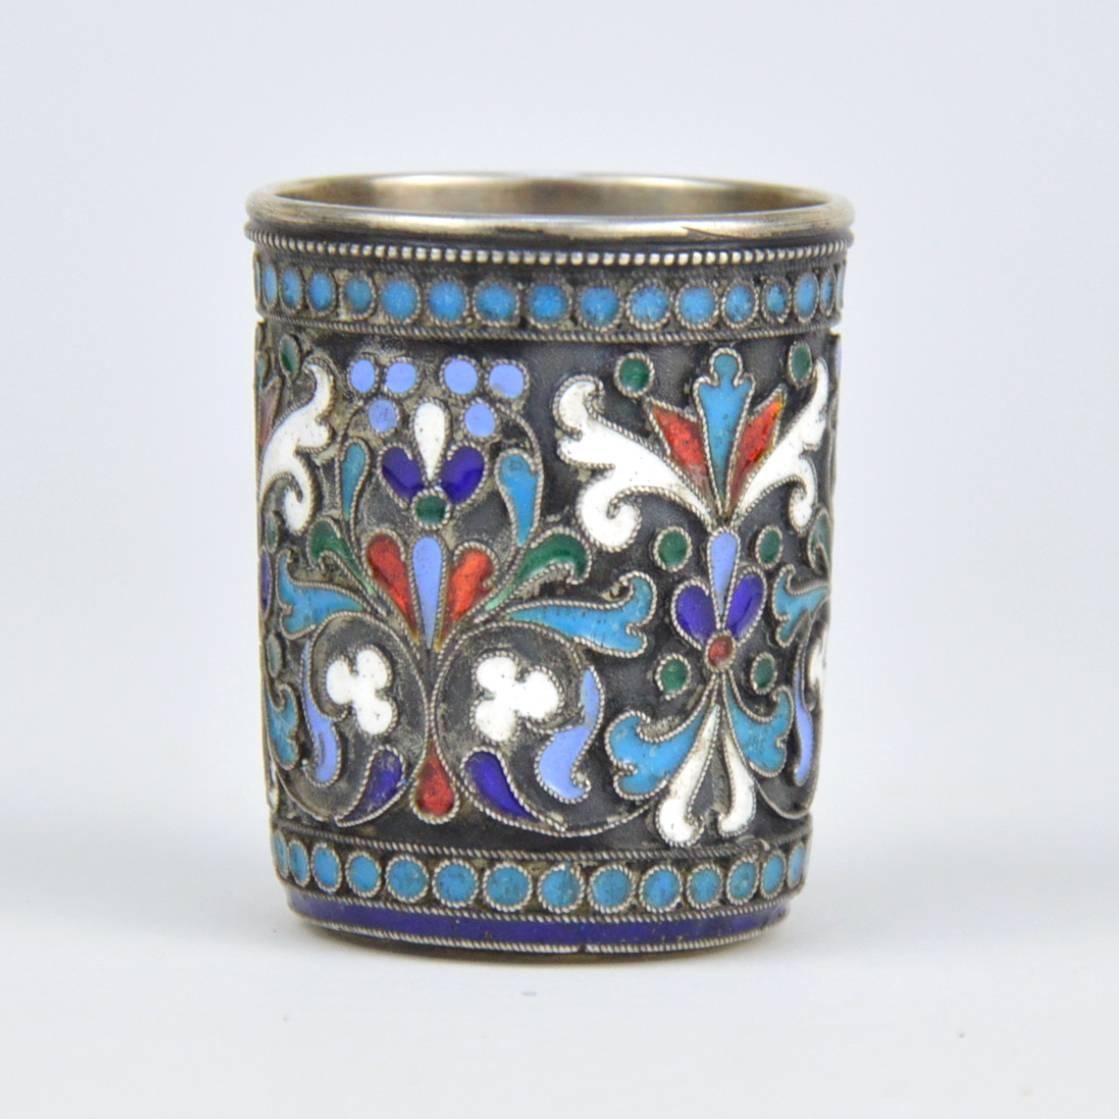 Imperial Russian cloisonné enamel and silver beaker. Finely hand decorated with a multi-color enamel scrolling foliage, flowers and pan-slavic ornamentation against a stippled background. Hallmarked with '84' Imperial Russian Silver standard and